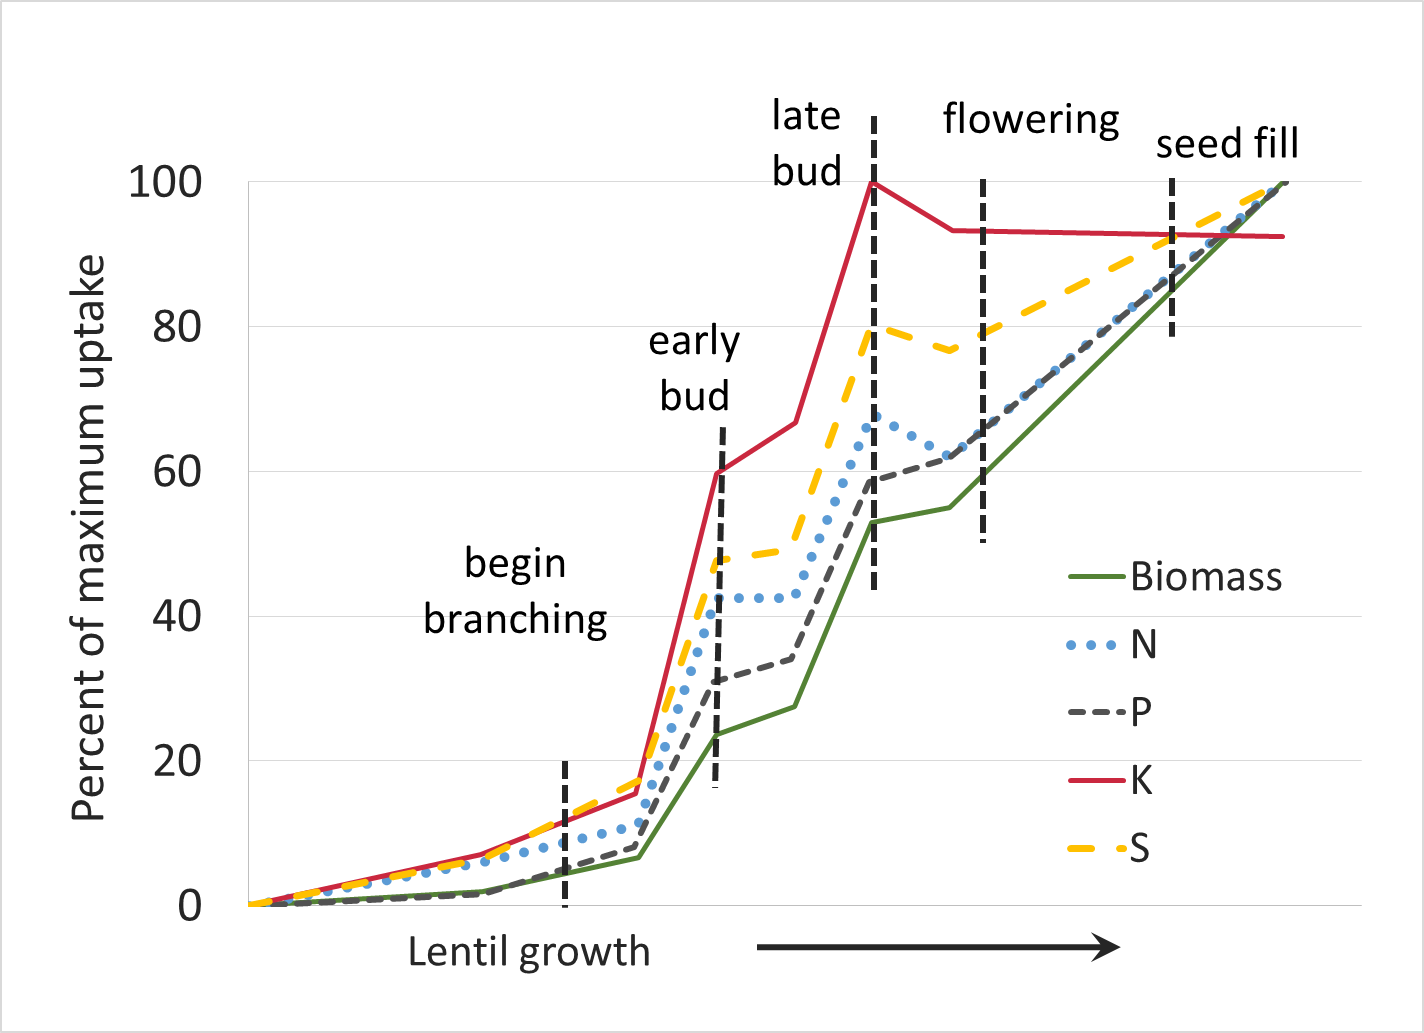 Lentil: Uptake increases substantially between branching and early bud. K reaches its maximum at late bud and decreases slightly while other nutrients increase until maturity.